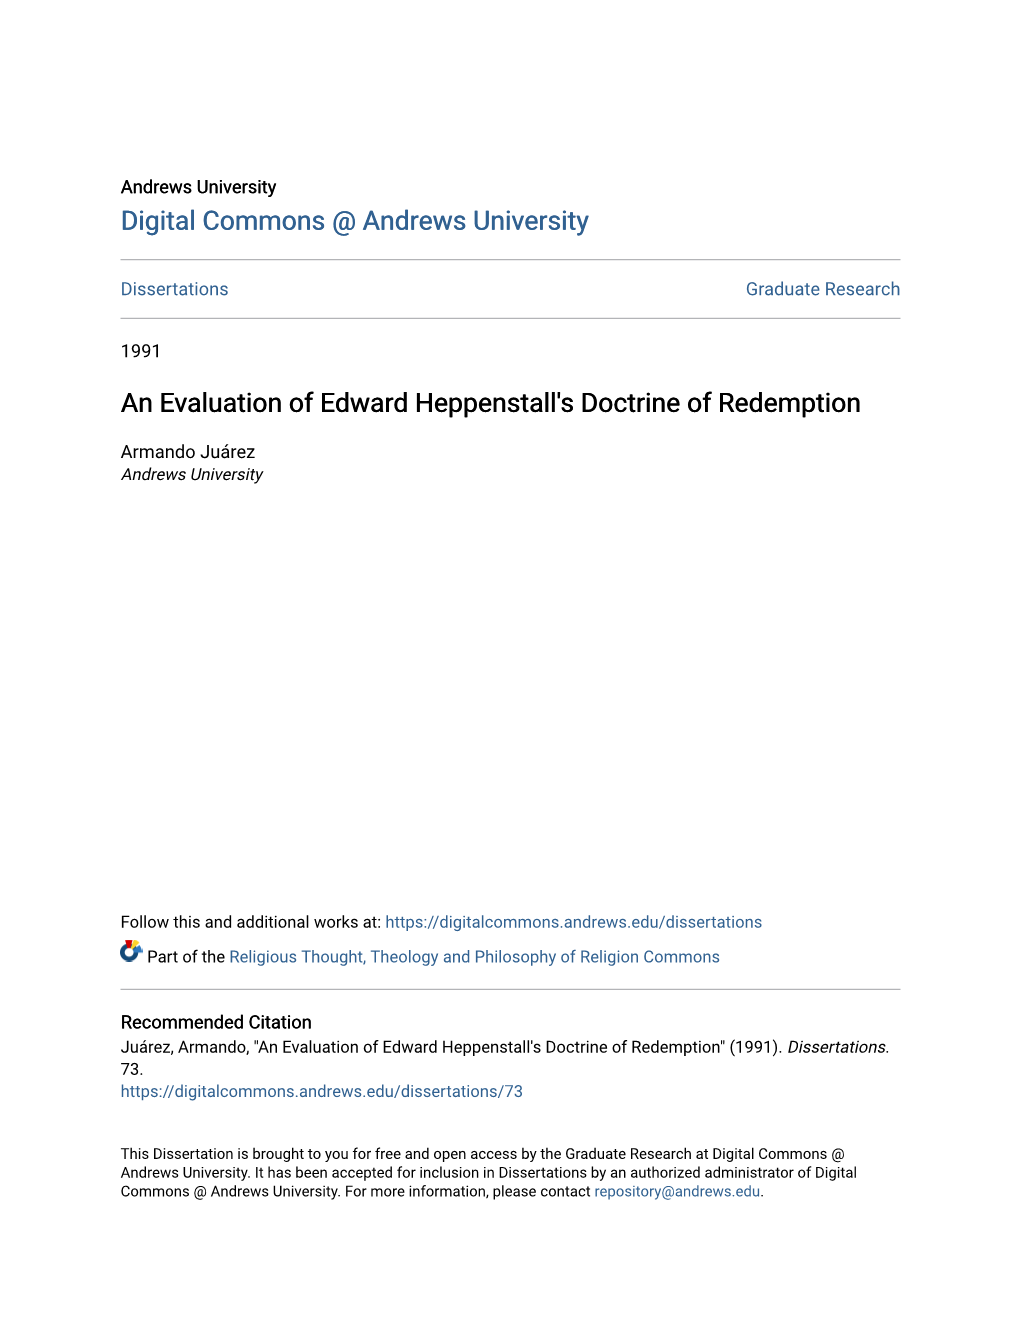 An Evaluation of Edward Heppenstall's Doctrine of Redemption